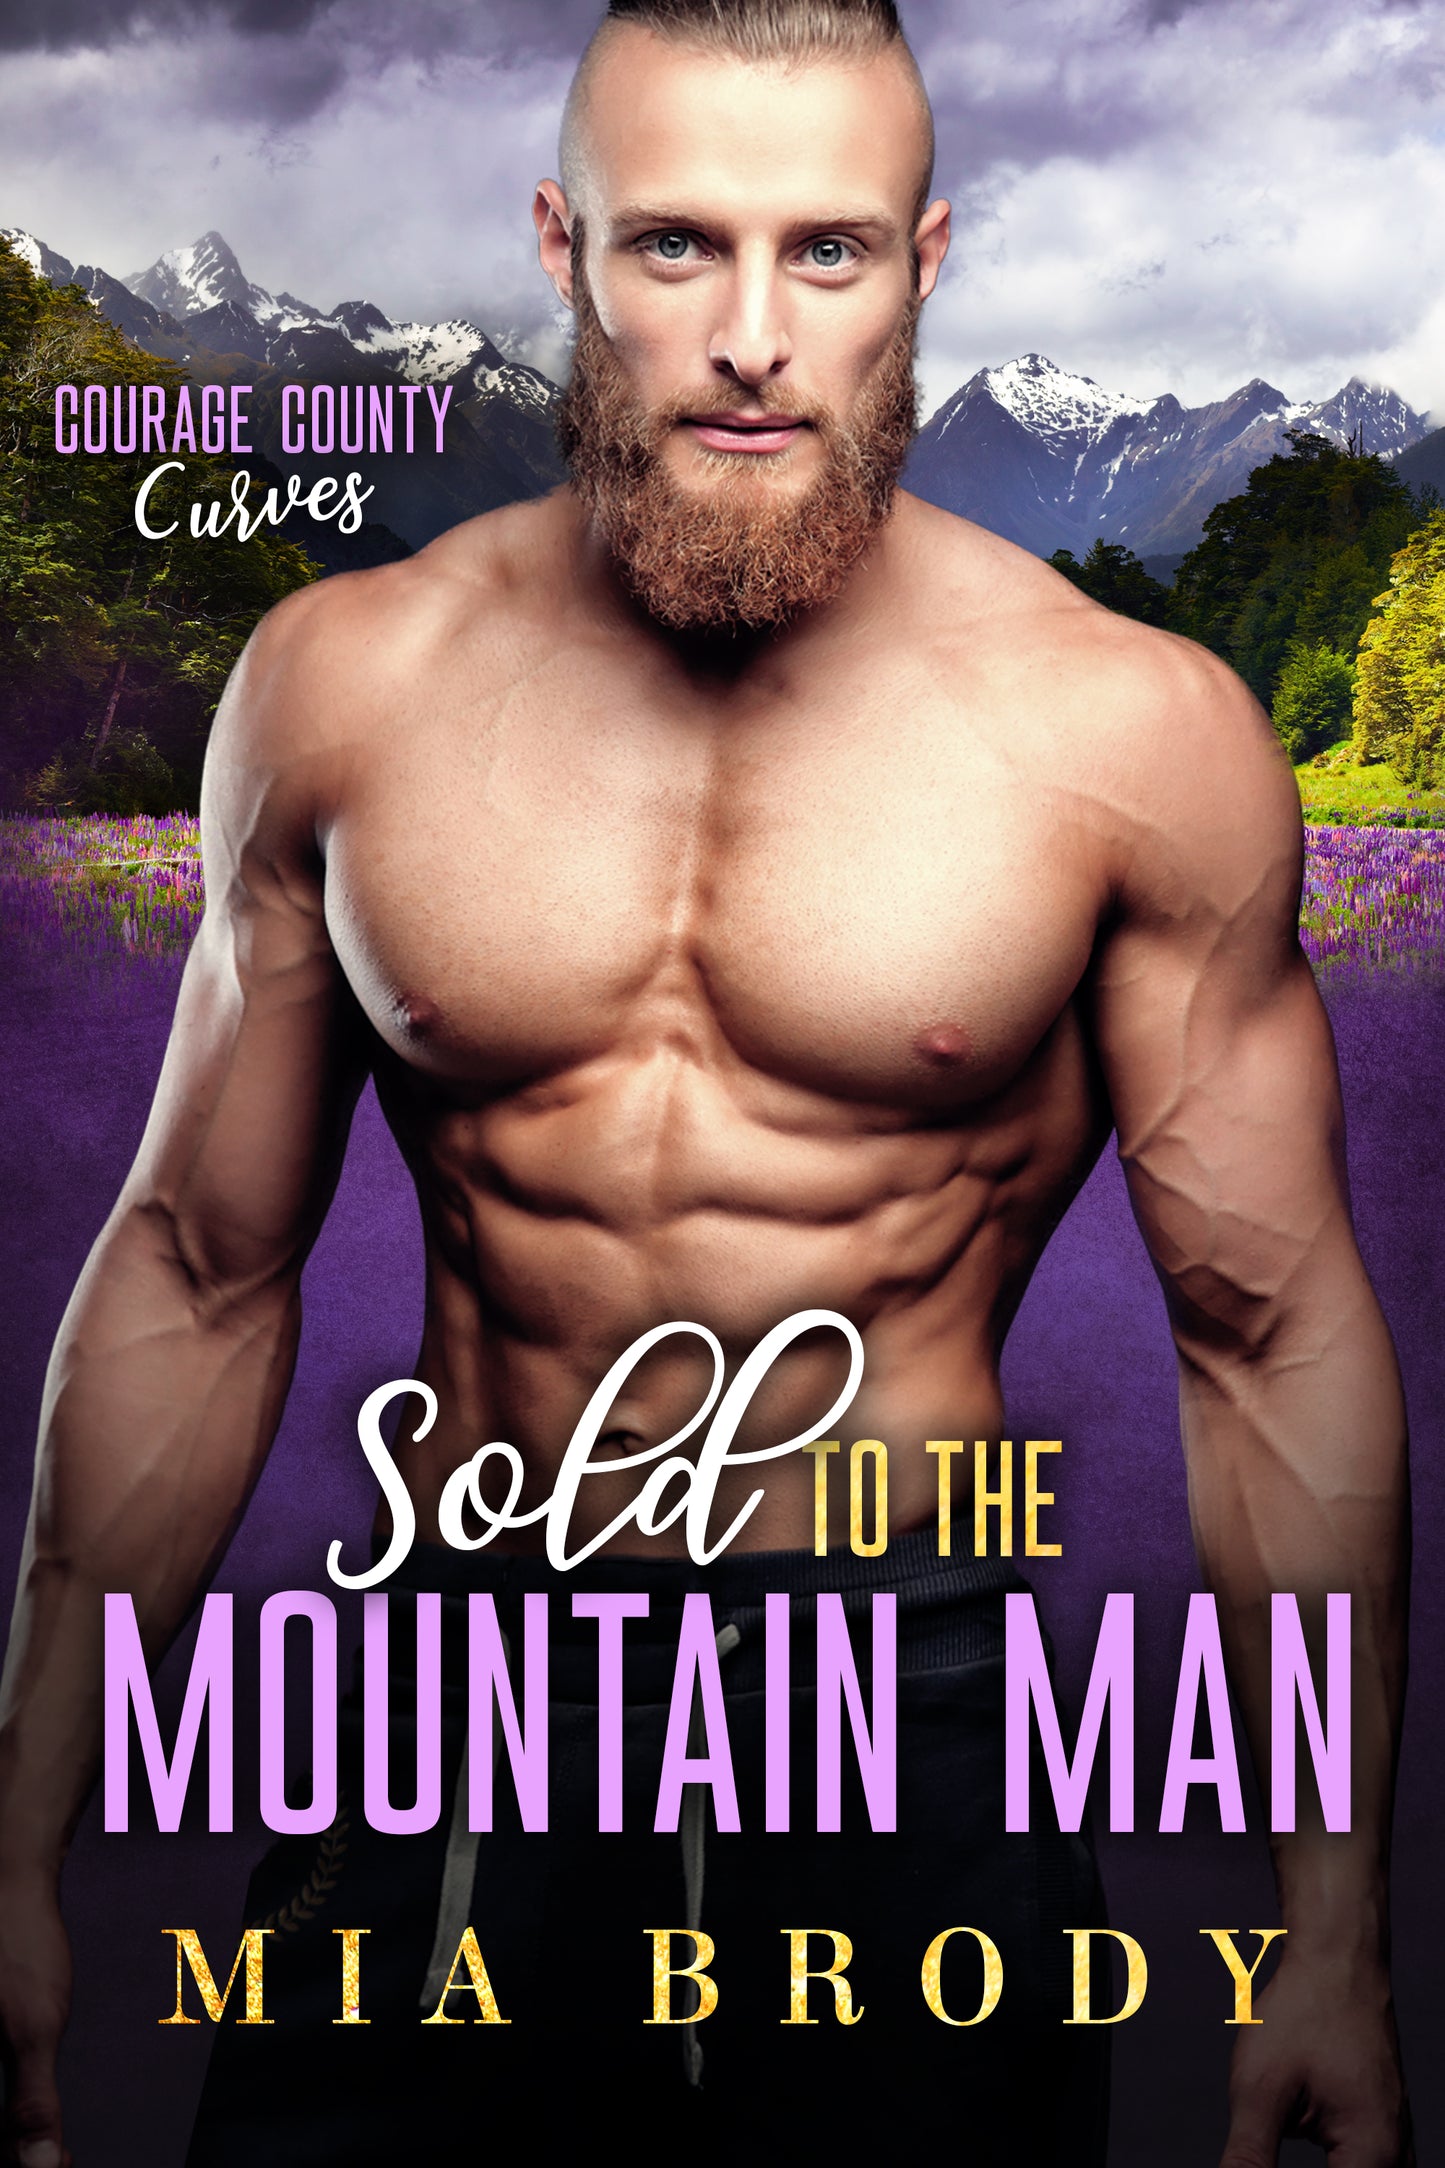 Sold to the Mountain Man